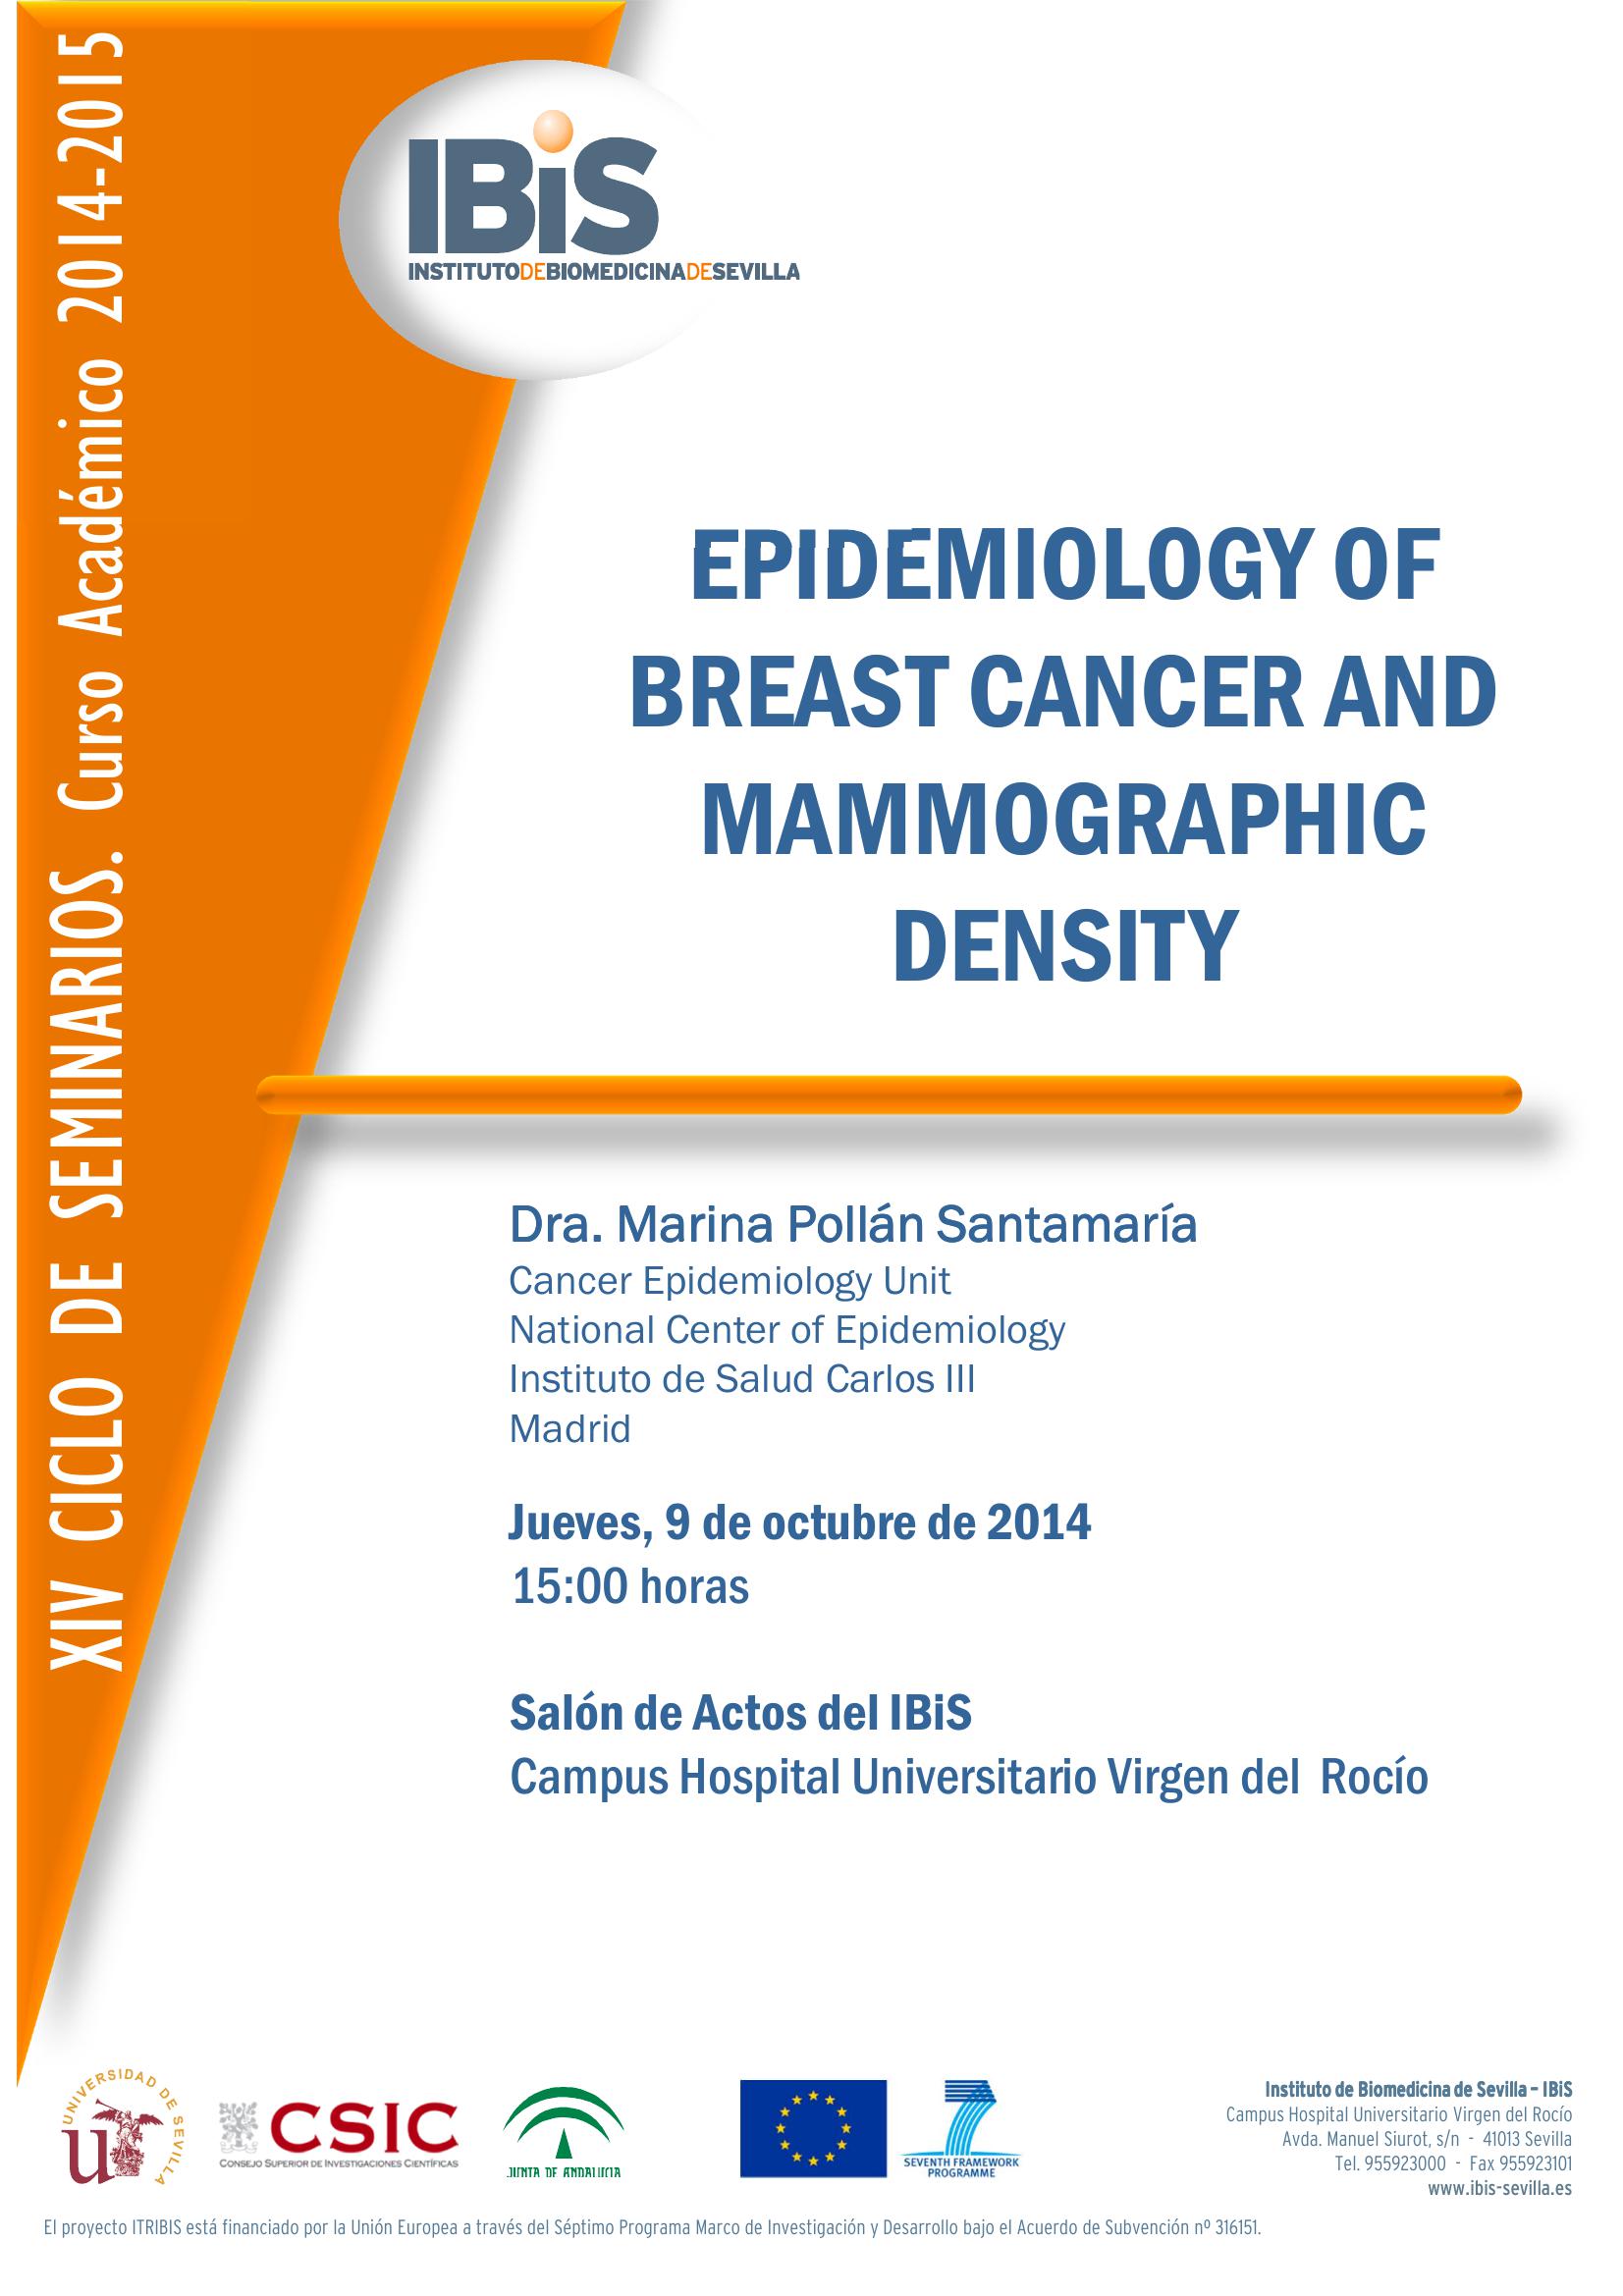 Poster: EPIDEMIOLOGY OF BREAST CANCER AND MAMMOGRAPHIC DENSITY